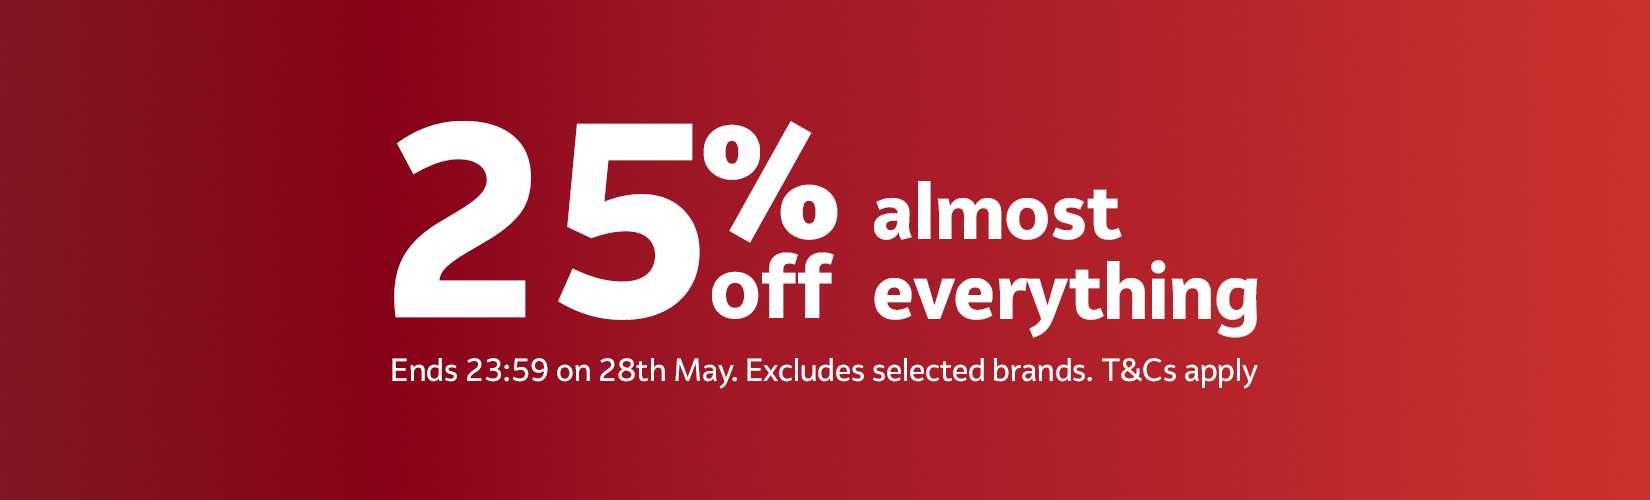 25% off almost everything. Ends 23:59 on 28th May. Excludes selected brands. T&Cs apply.